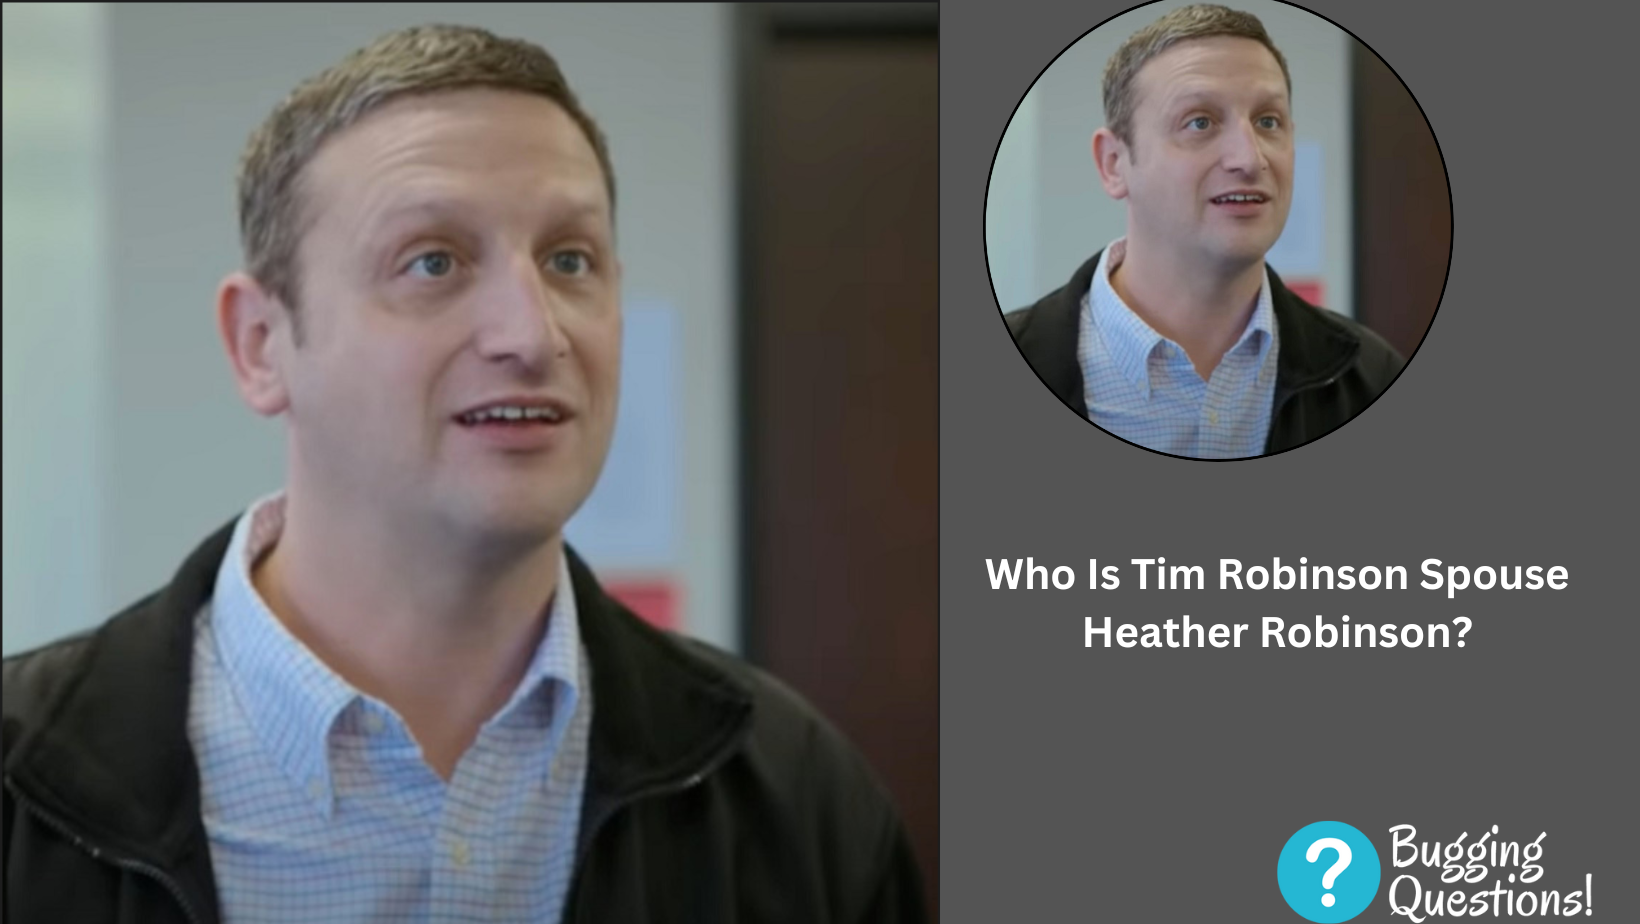 Who Is Tim Robinson Spouse Heather Robinson?